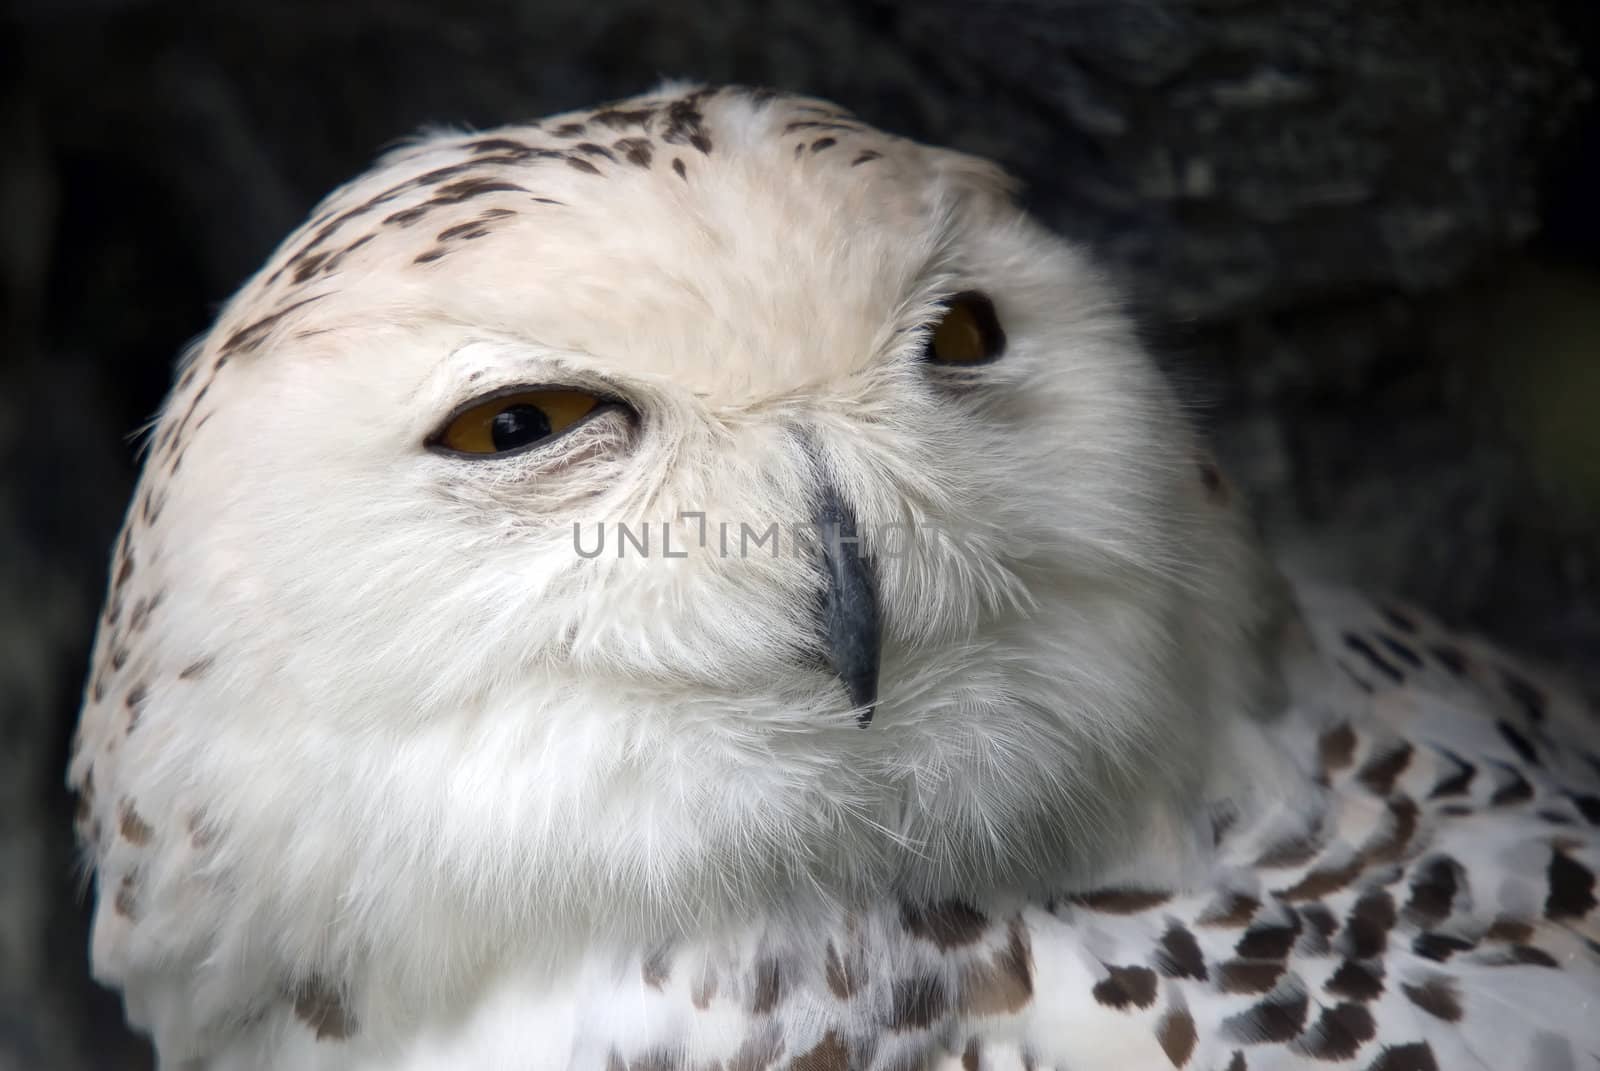 Close up portrait of a beautiful snowy owl